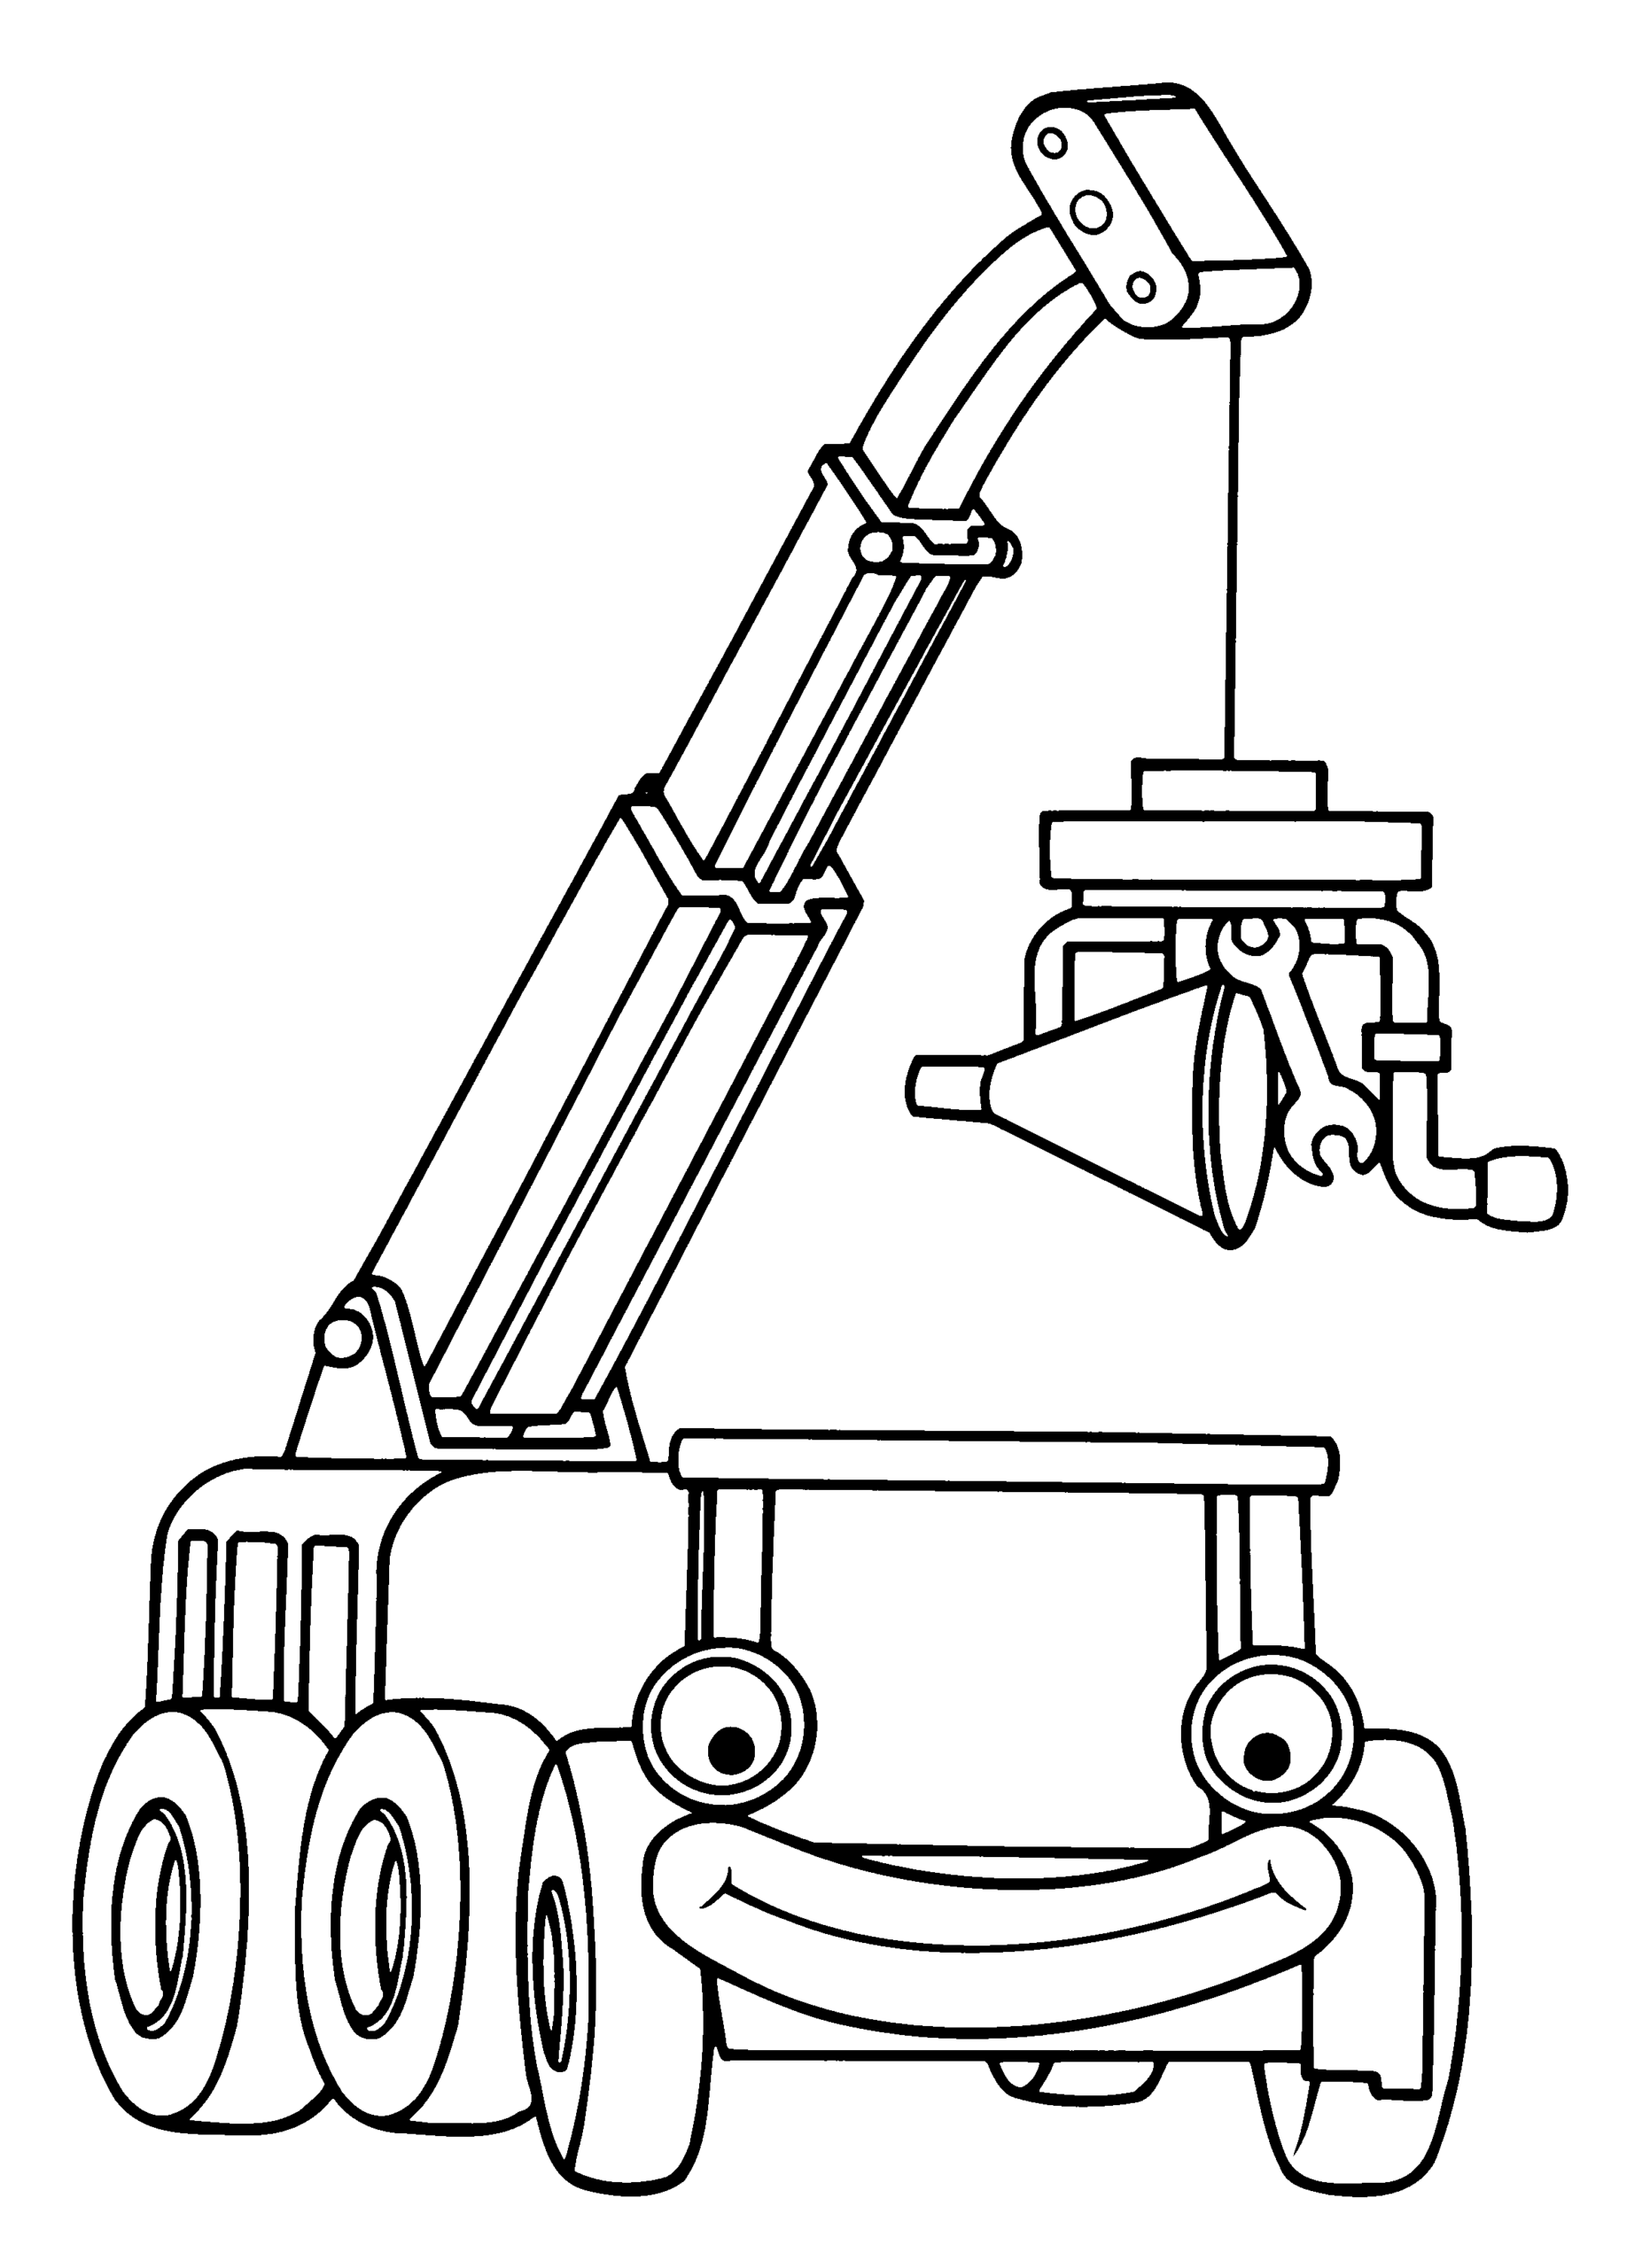 Bob the Builder Coloring Pages TV Film bob der baumeister Printable 2020 00947 Coloring4free